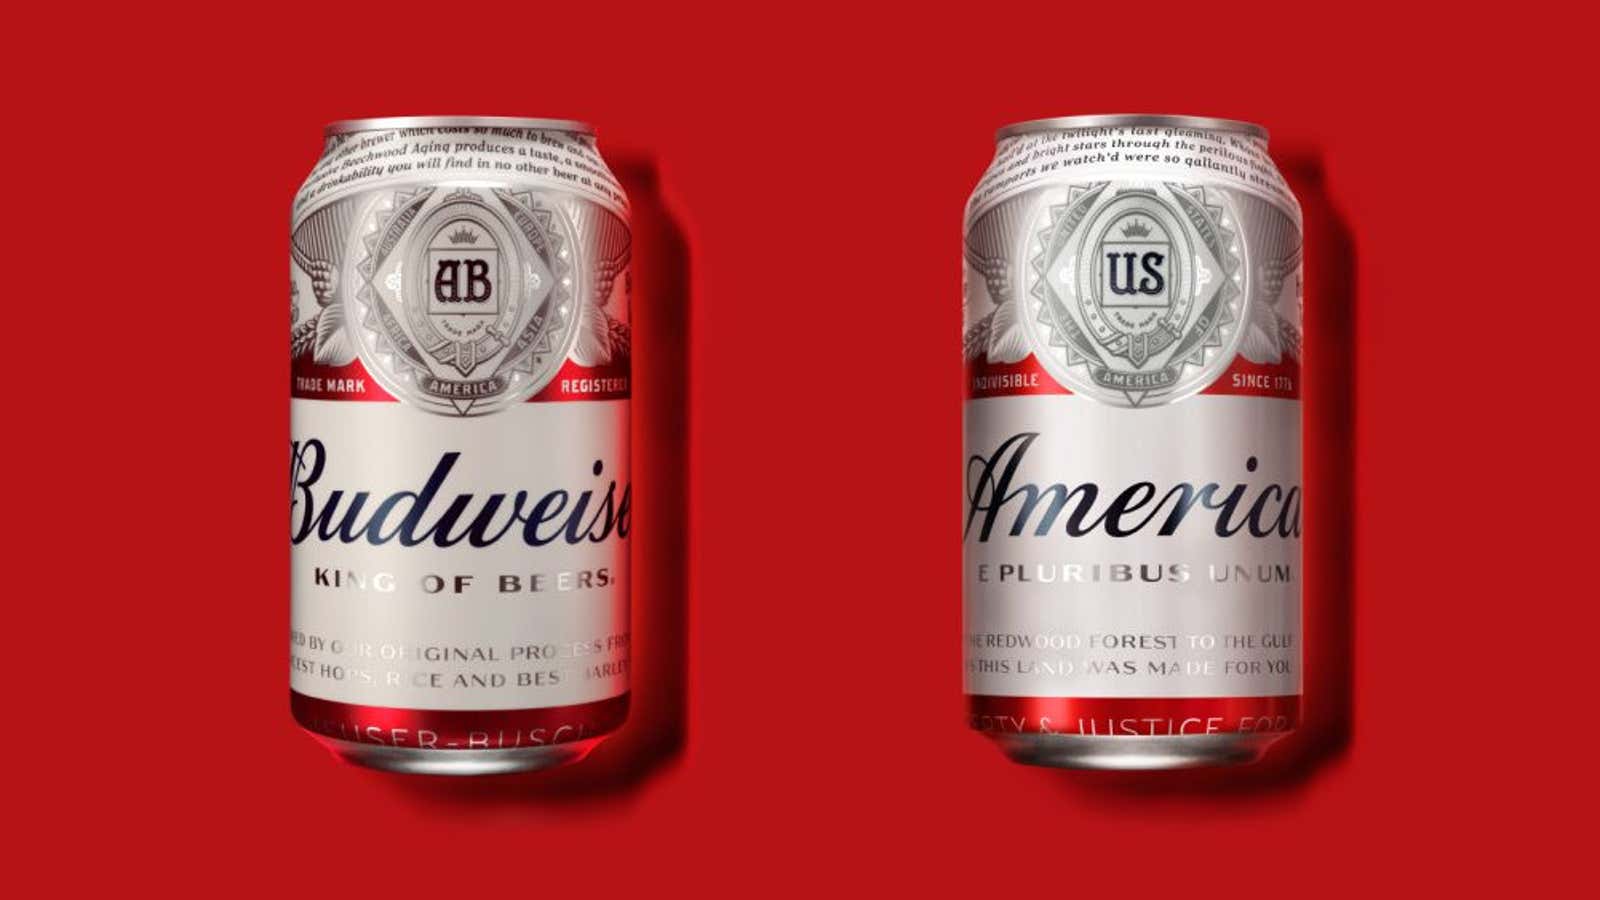 Budweiser thinks it can rename itself “America”